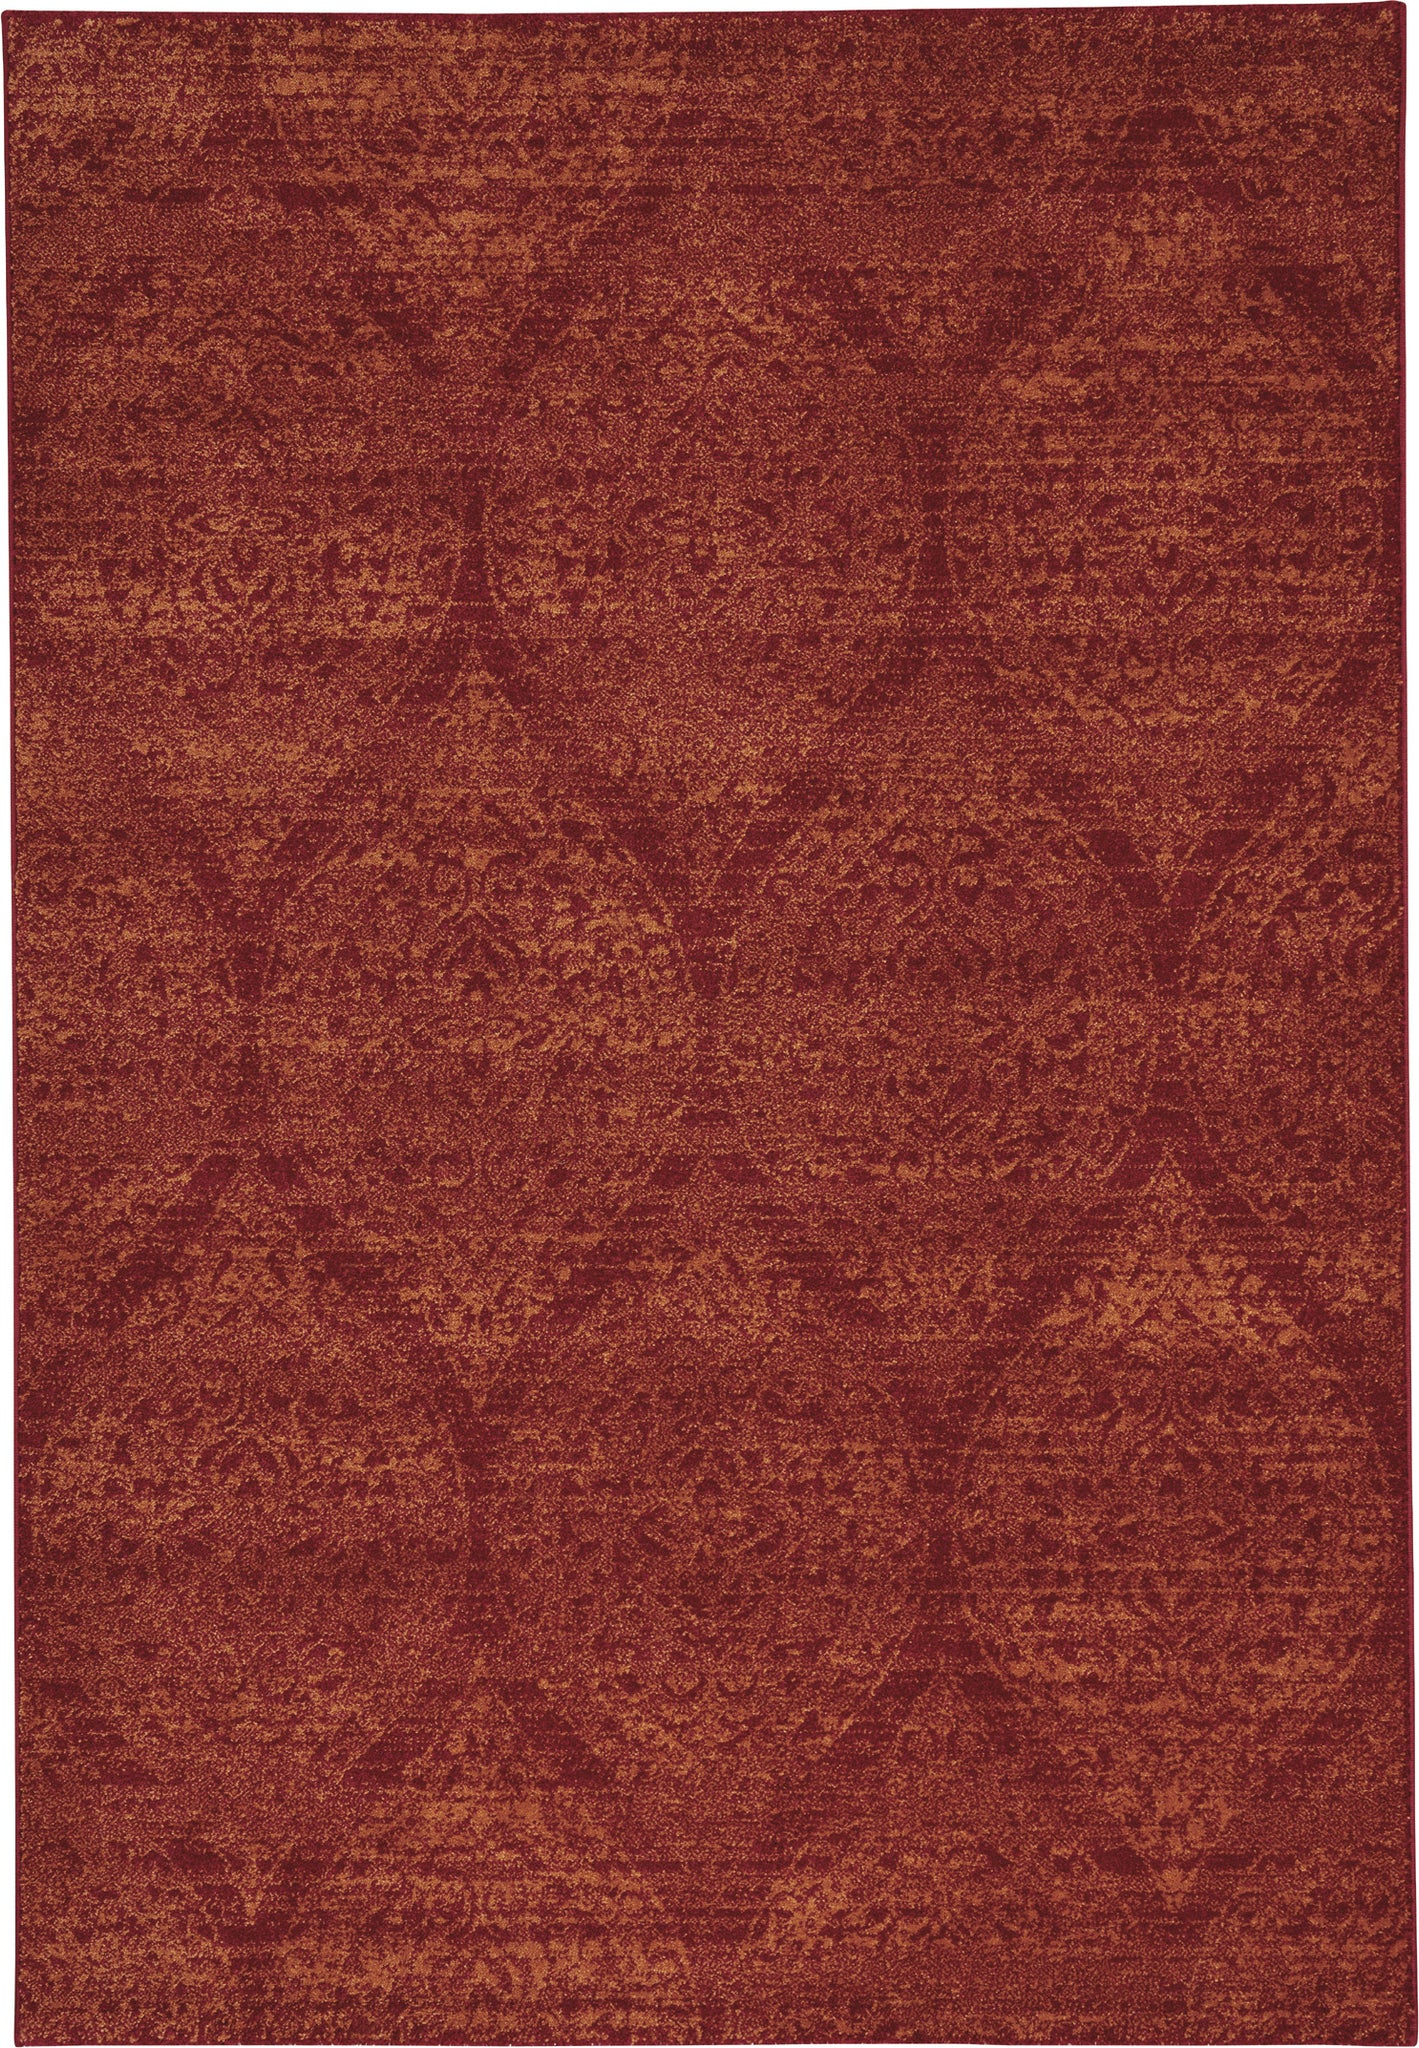 Capel Channel 4742 Flame Area Rug main image